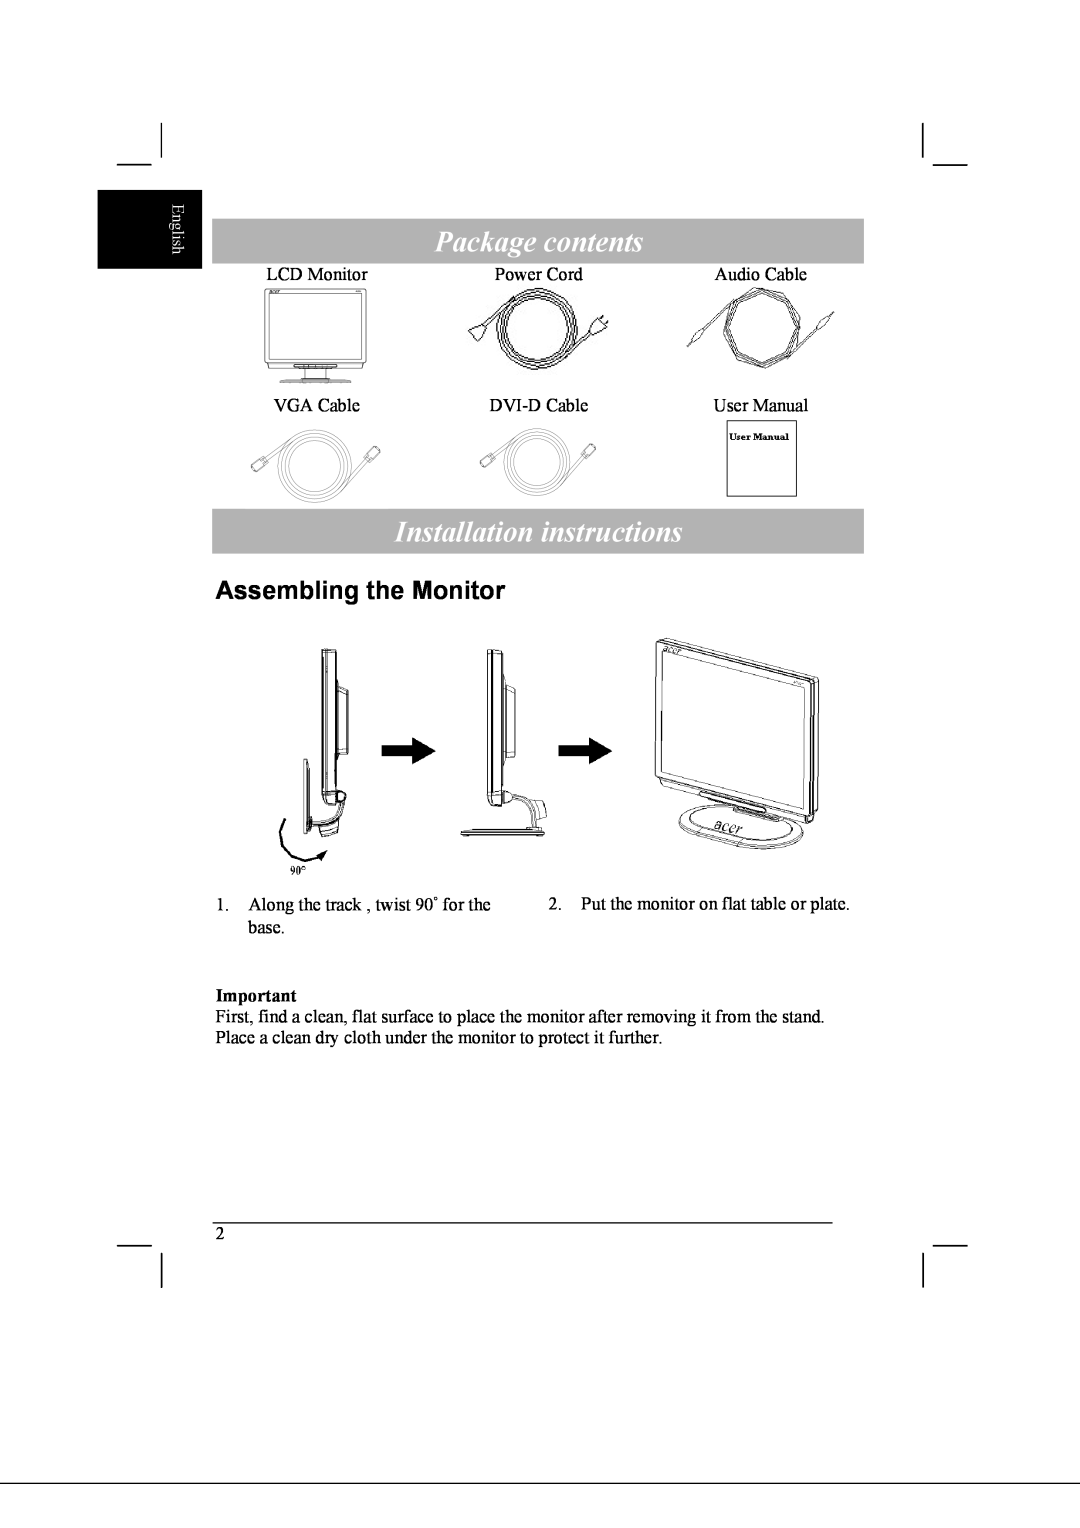 Acer AL2021 manual Package contents, Installation instructions, Assembling the Monitor 